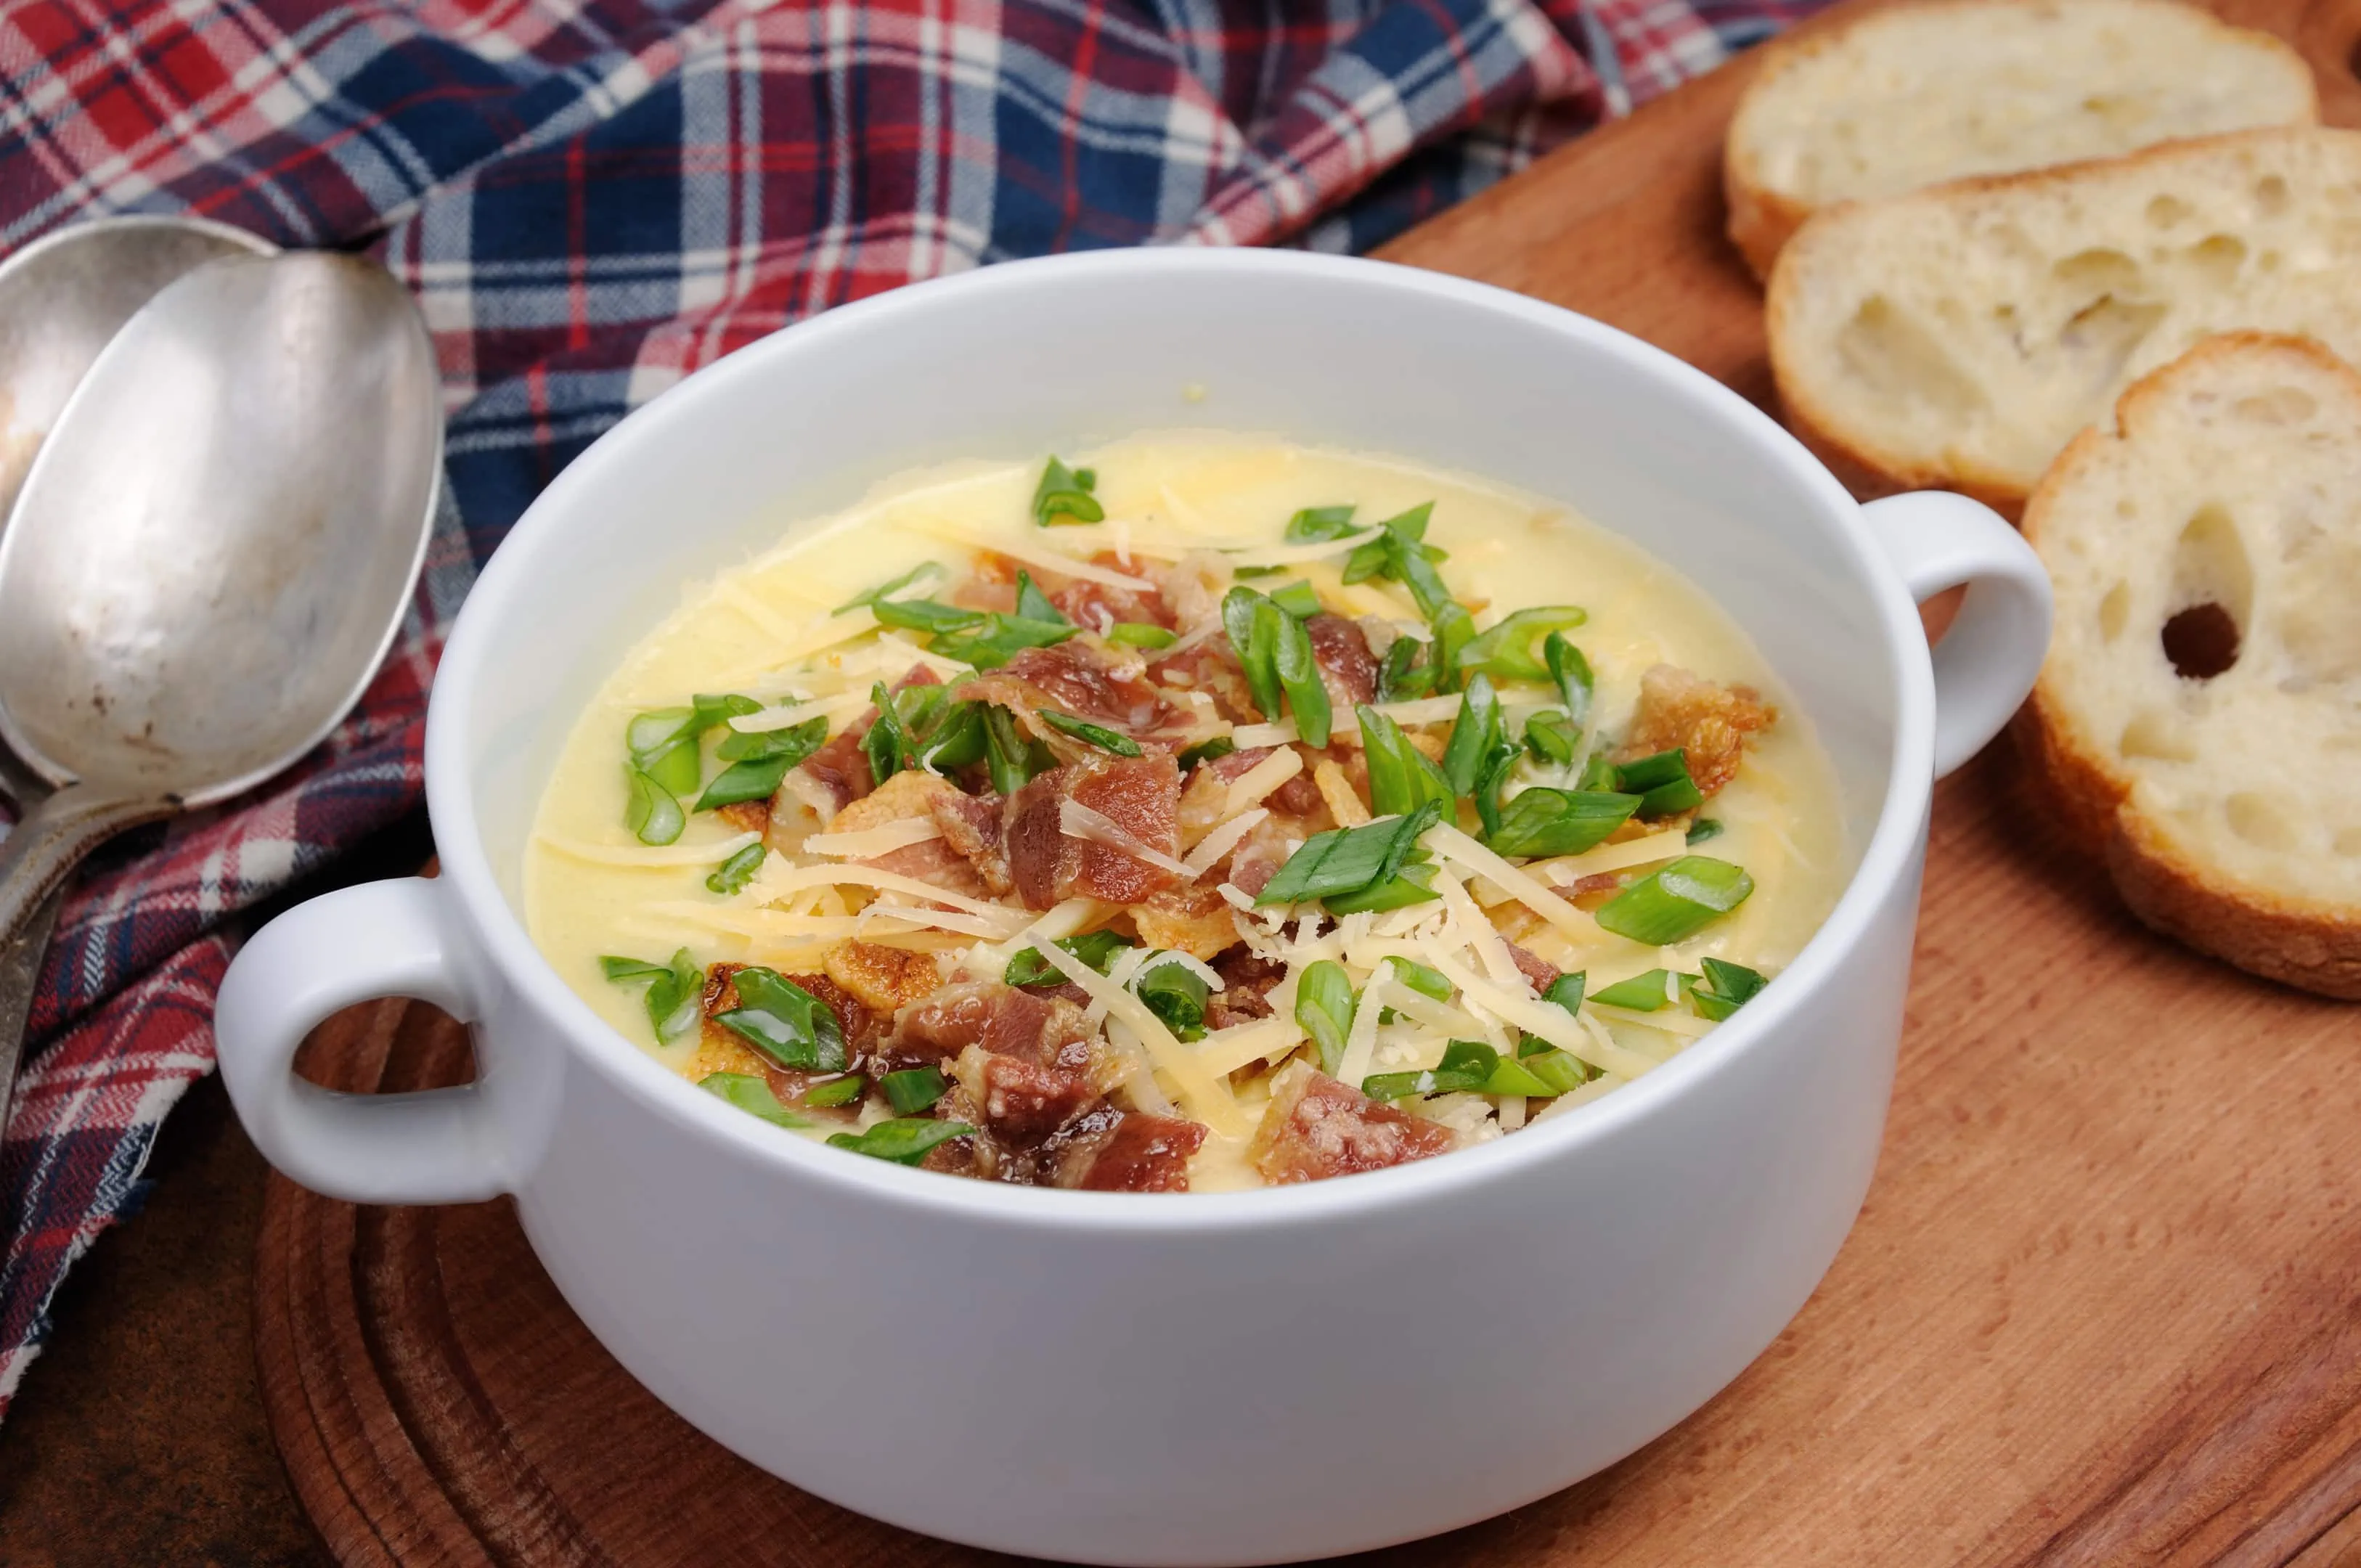 Creamy O'Charley's potato soup recipe with bacon, cheese, and green onions